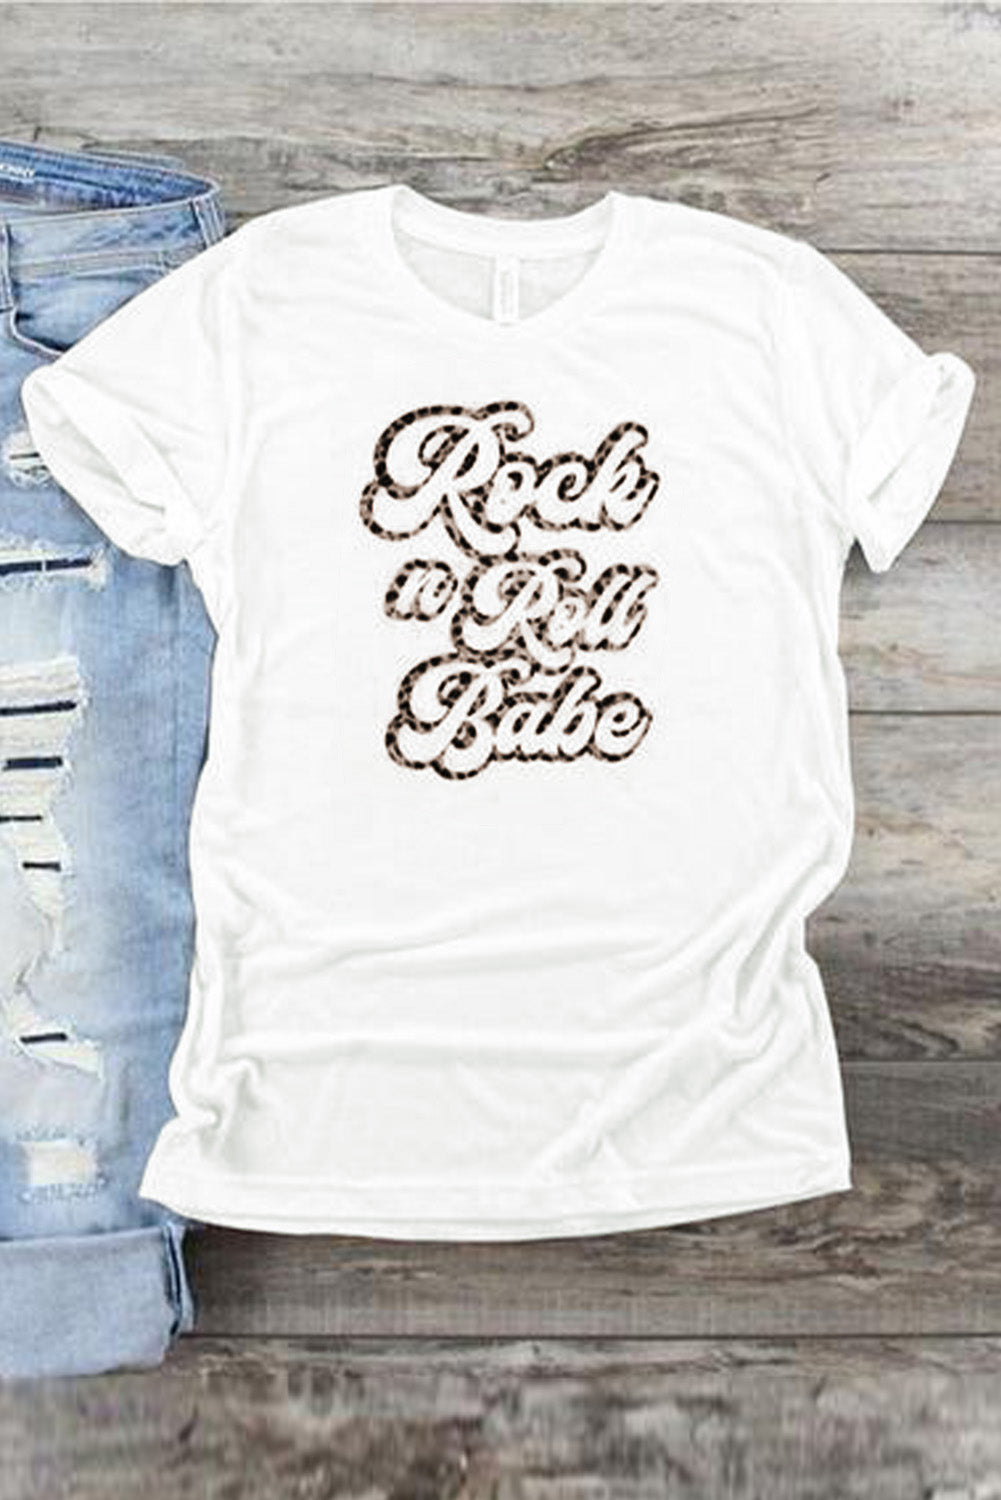 Rock N Roll Babe Leopard Graphic Tee